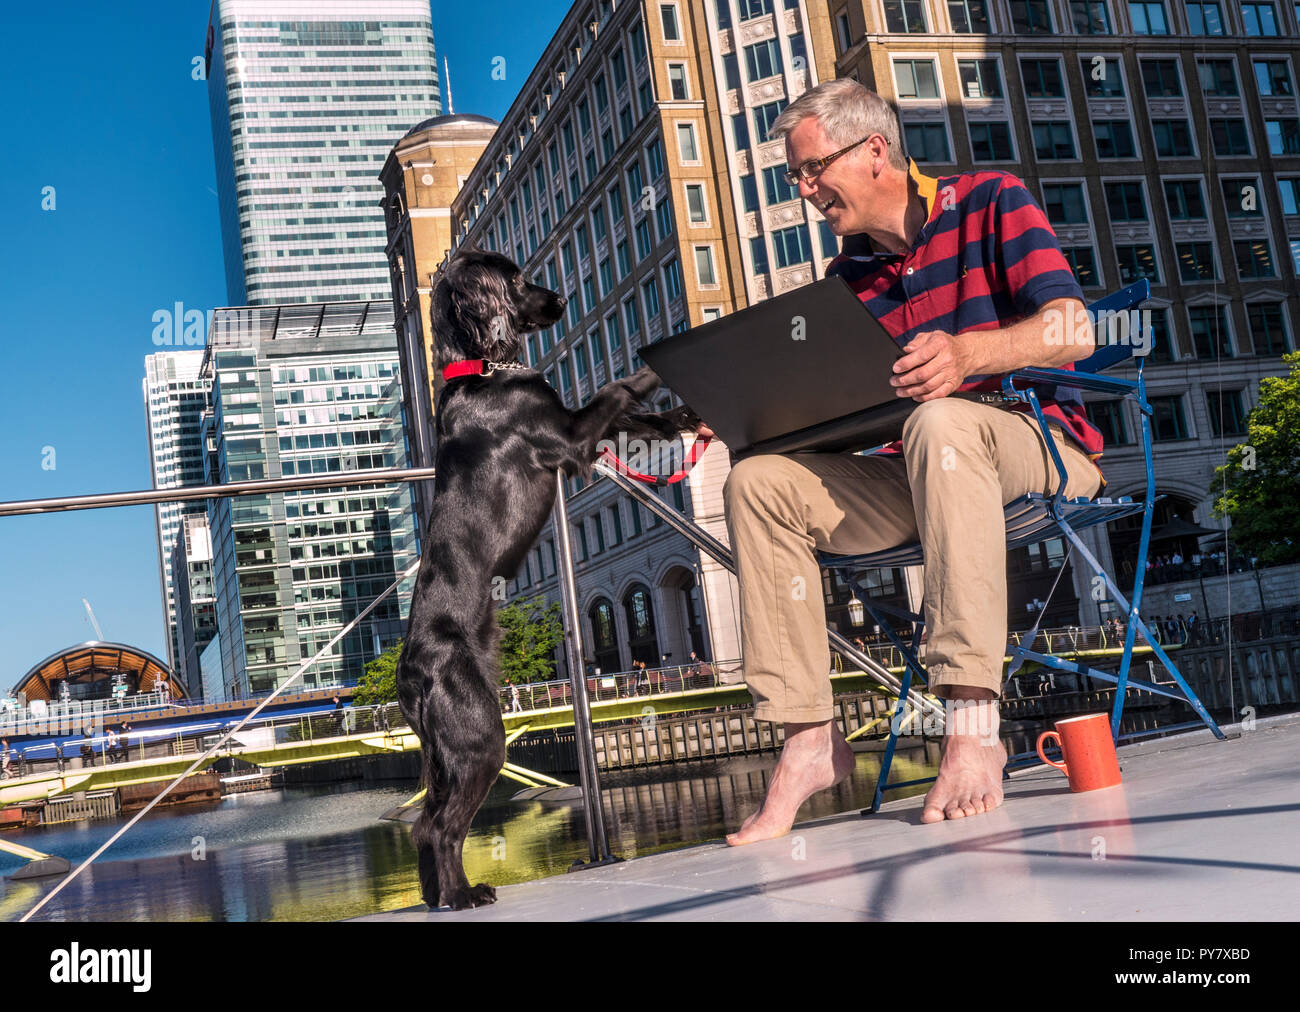 Man & dog happily networking on deck of his river barge home office enjoying sun & his pet spaniel, big business city buildings Canary Wharf London Stock Photo